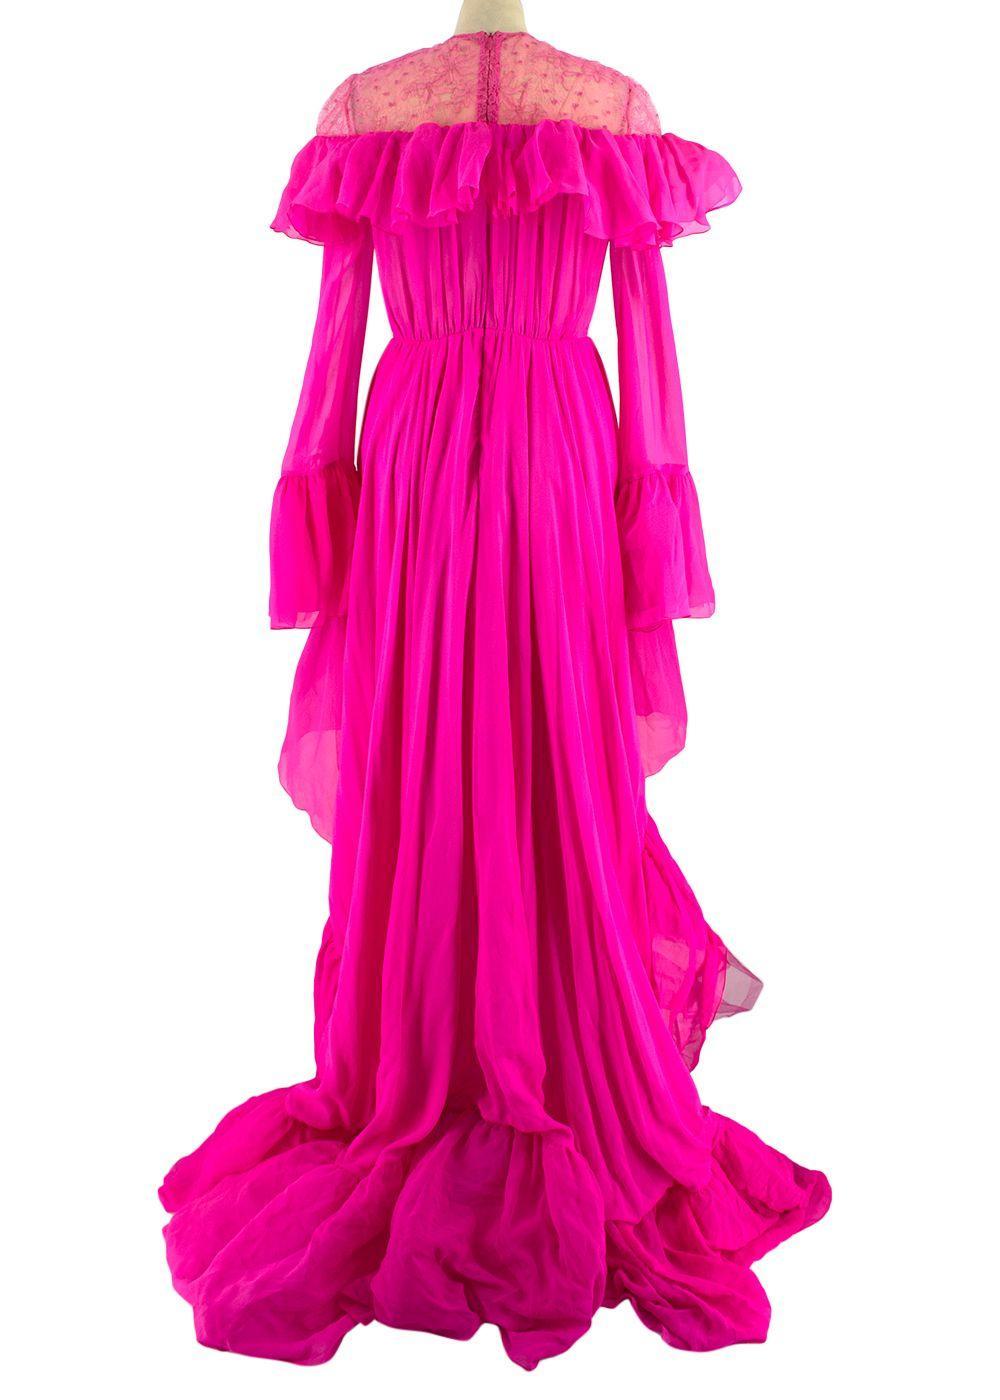 Giambattista Valli Hot Pink Silk Ruffled Gown with Lace Shoulders and Black Bow In Excellent Condition For Sale In London, England